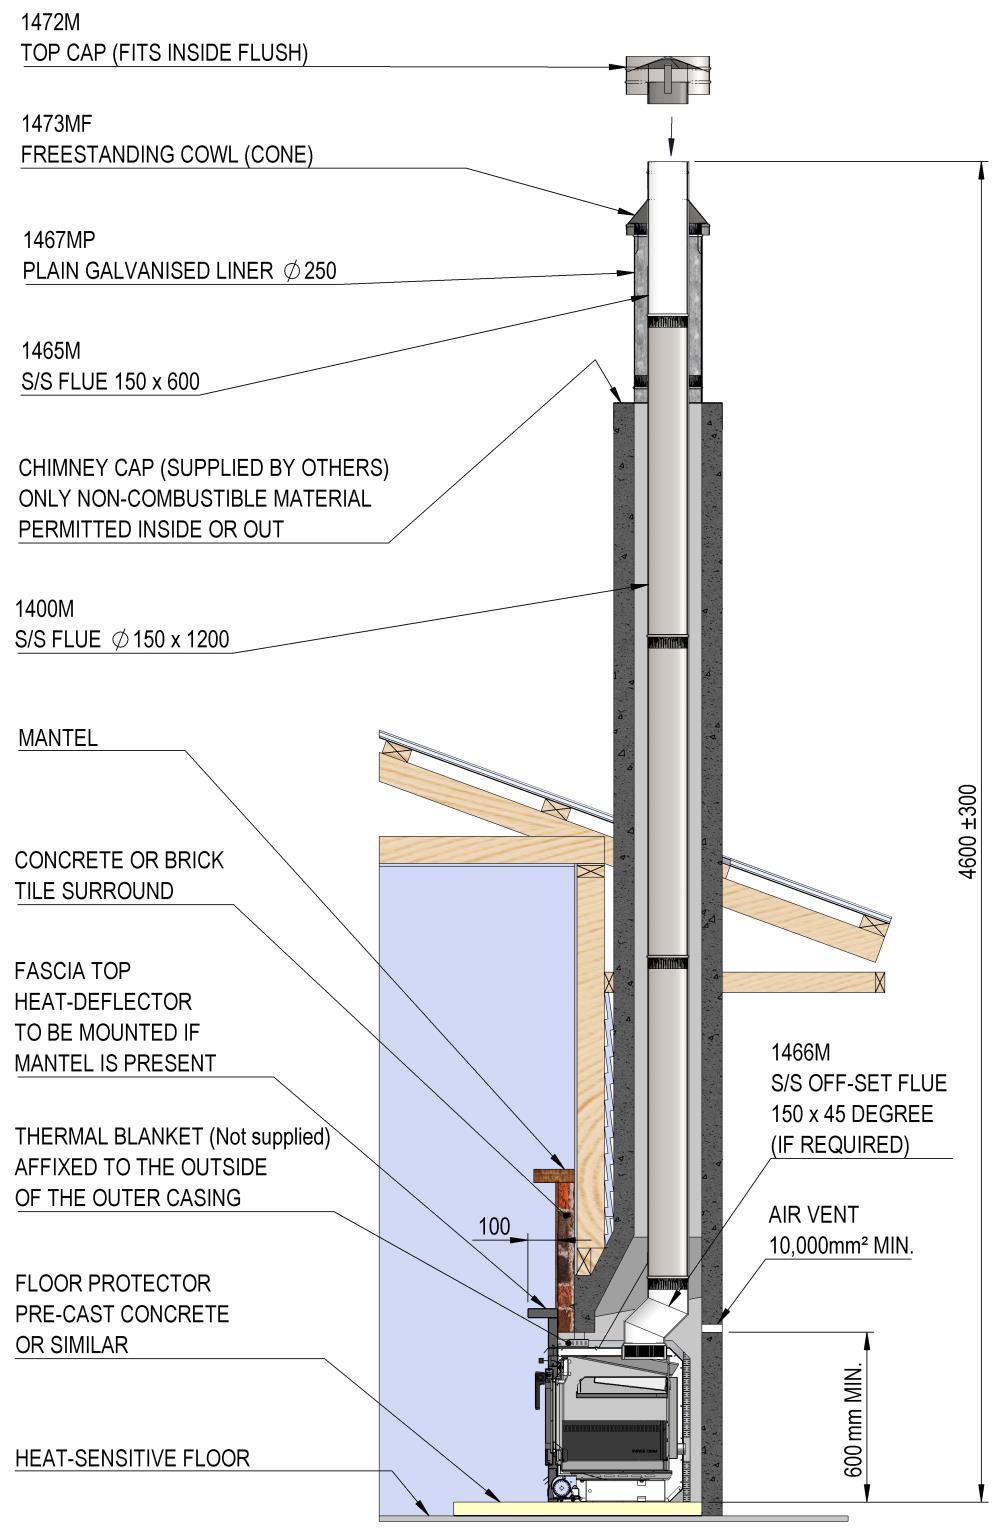 J. YUNCA Insert Flue Kit Masonry (Complies with AS/NZS 2918:2001): J1. Masonry Flue Kit consists of the following: 4.8m x 150mm stainless steel flue. 1.2m x 250mm galvanised liner.